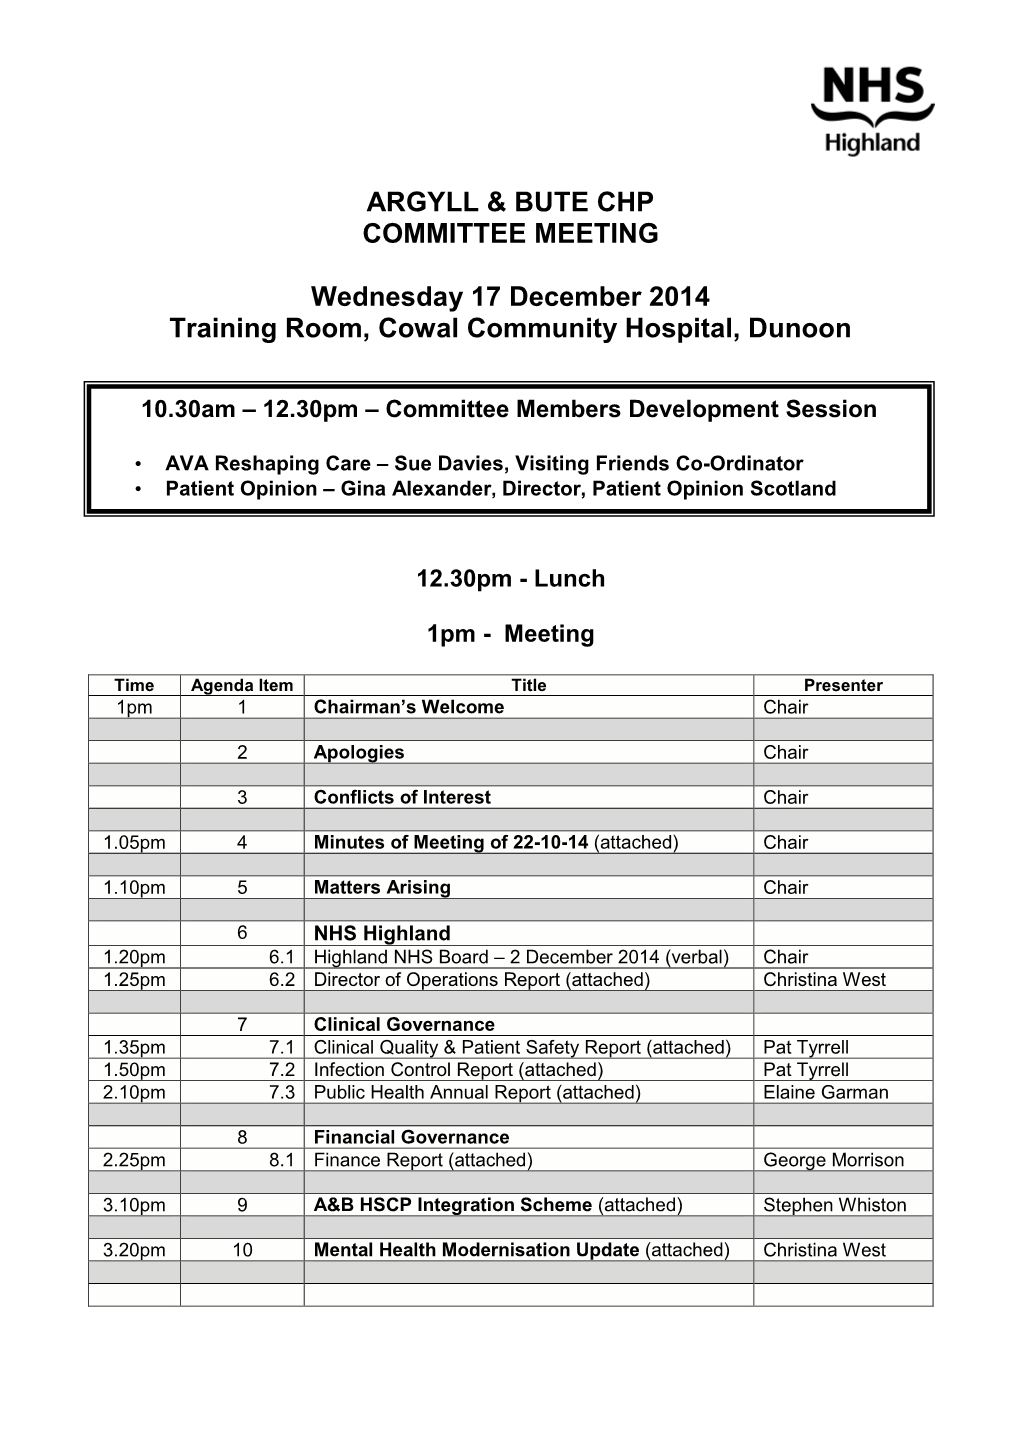 ARGYLL & BUTE CHP COMMITTEE MEETING Wednesday 17 December 2014 Training Room, Cowal Community Hospital, Dunoon